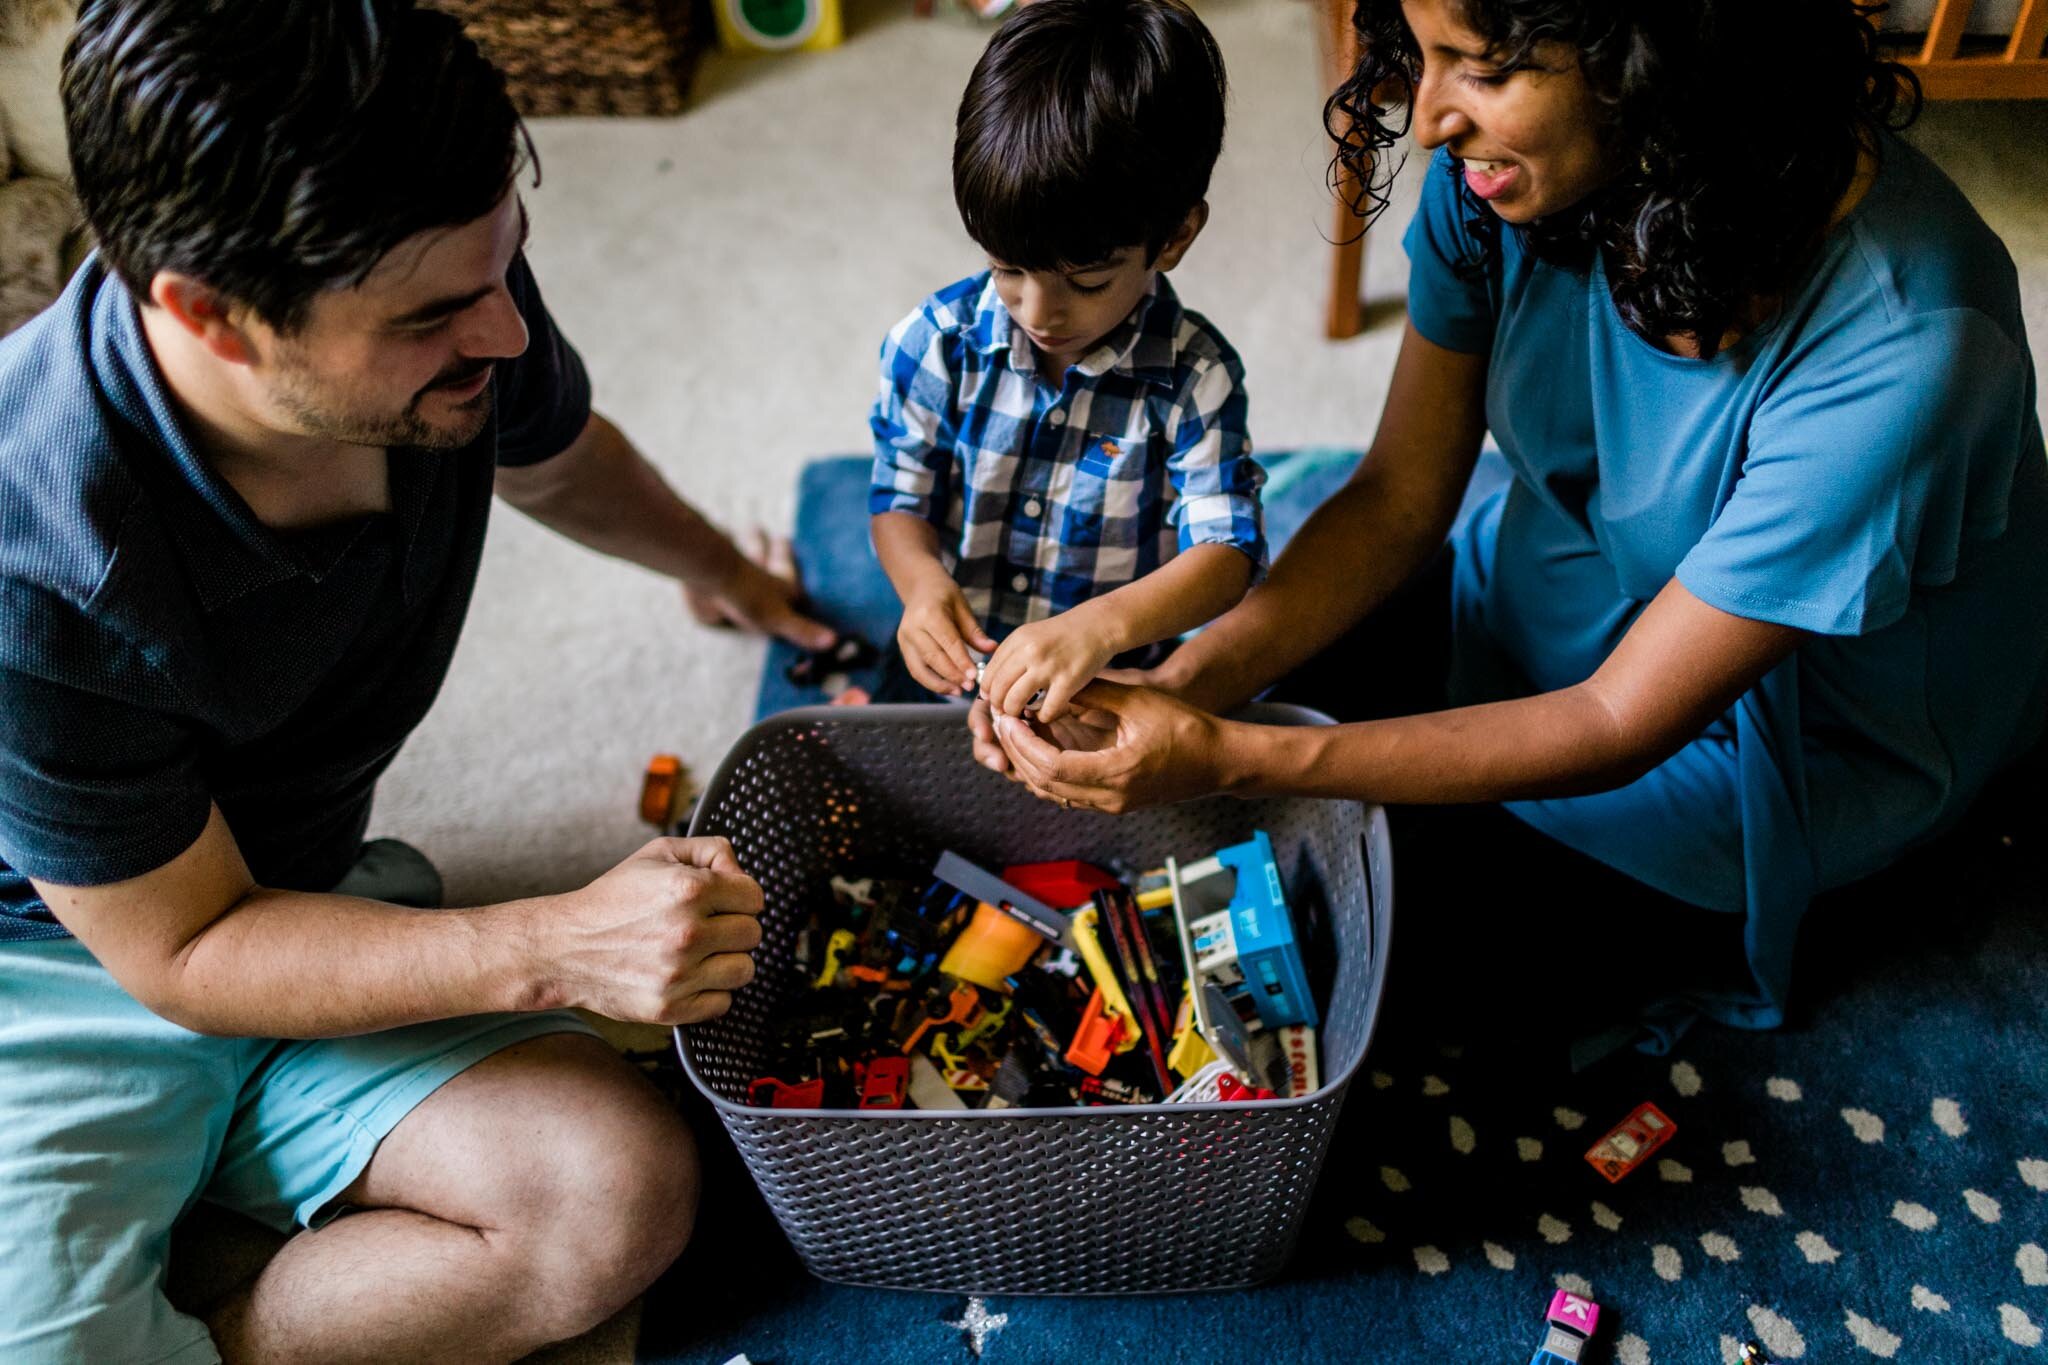 Durham Family Photographer | By G. Lin Photography | Family playing together with toys at home